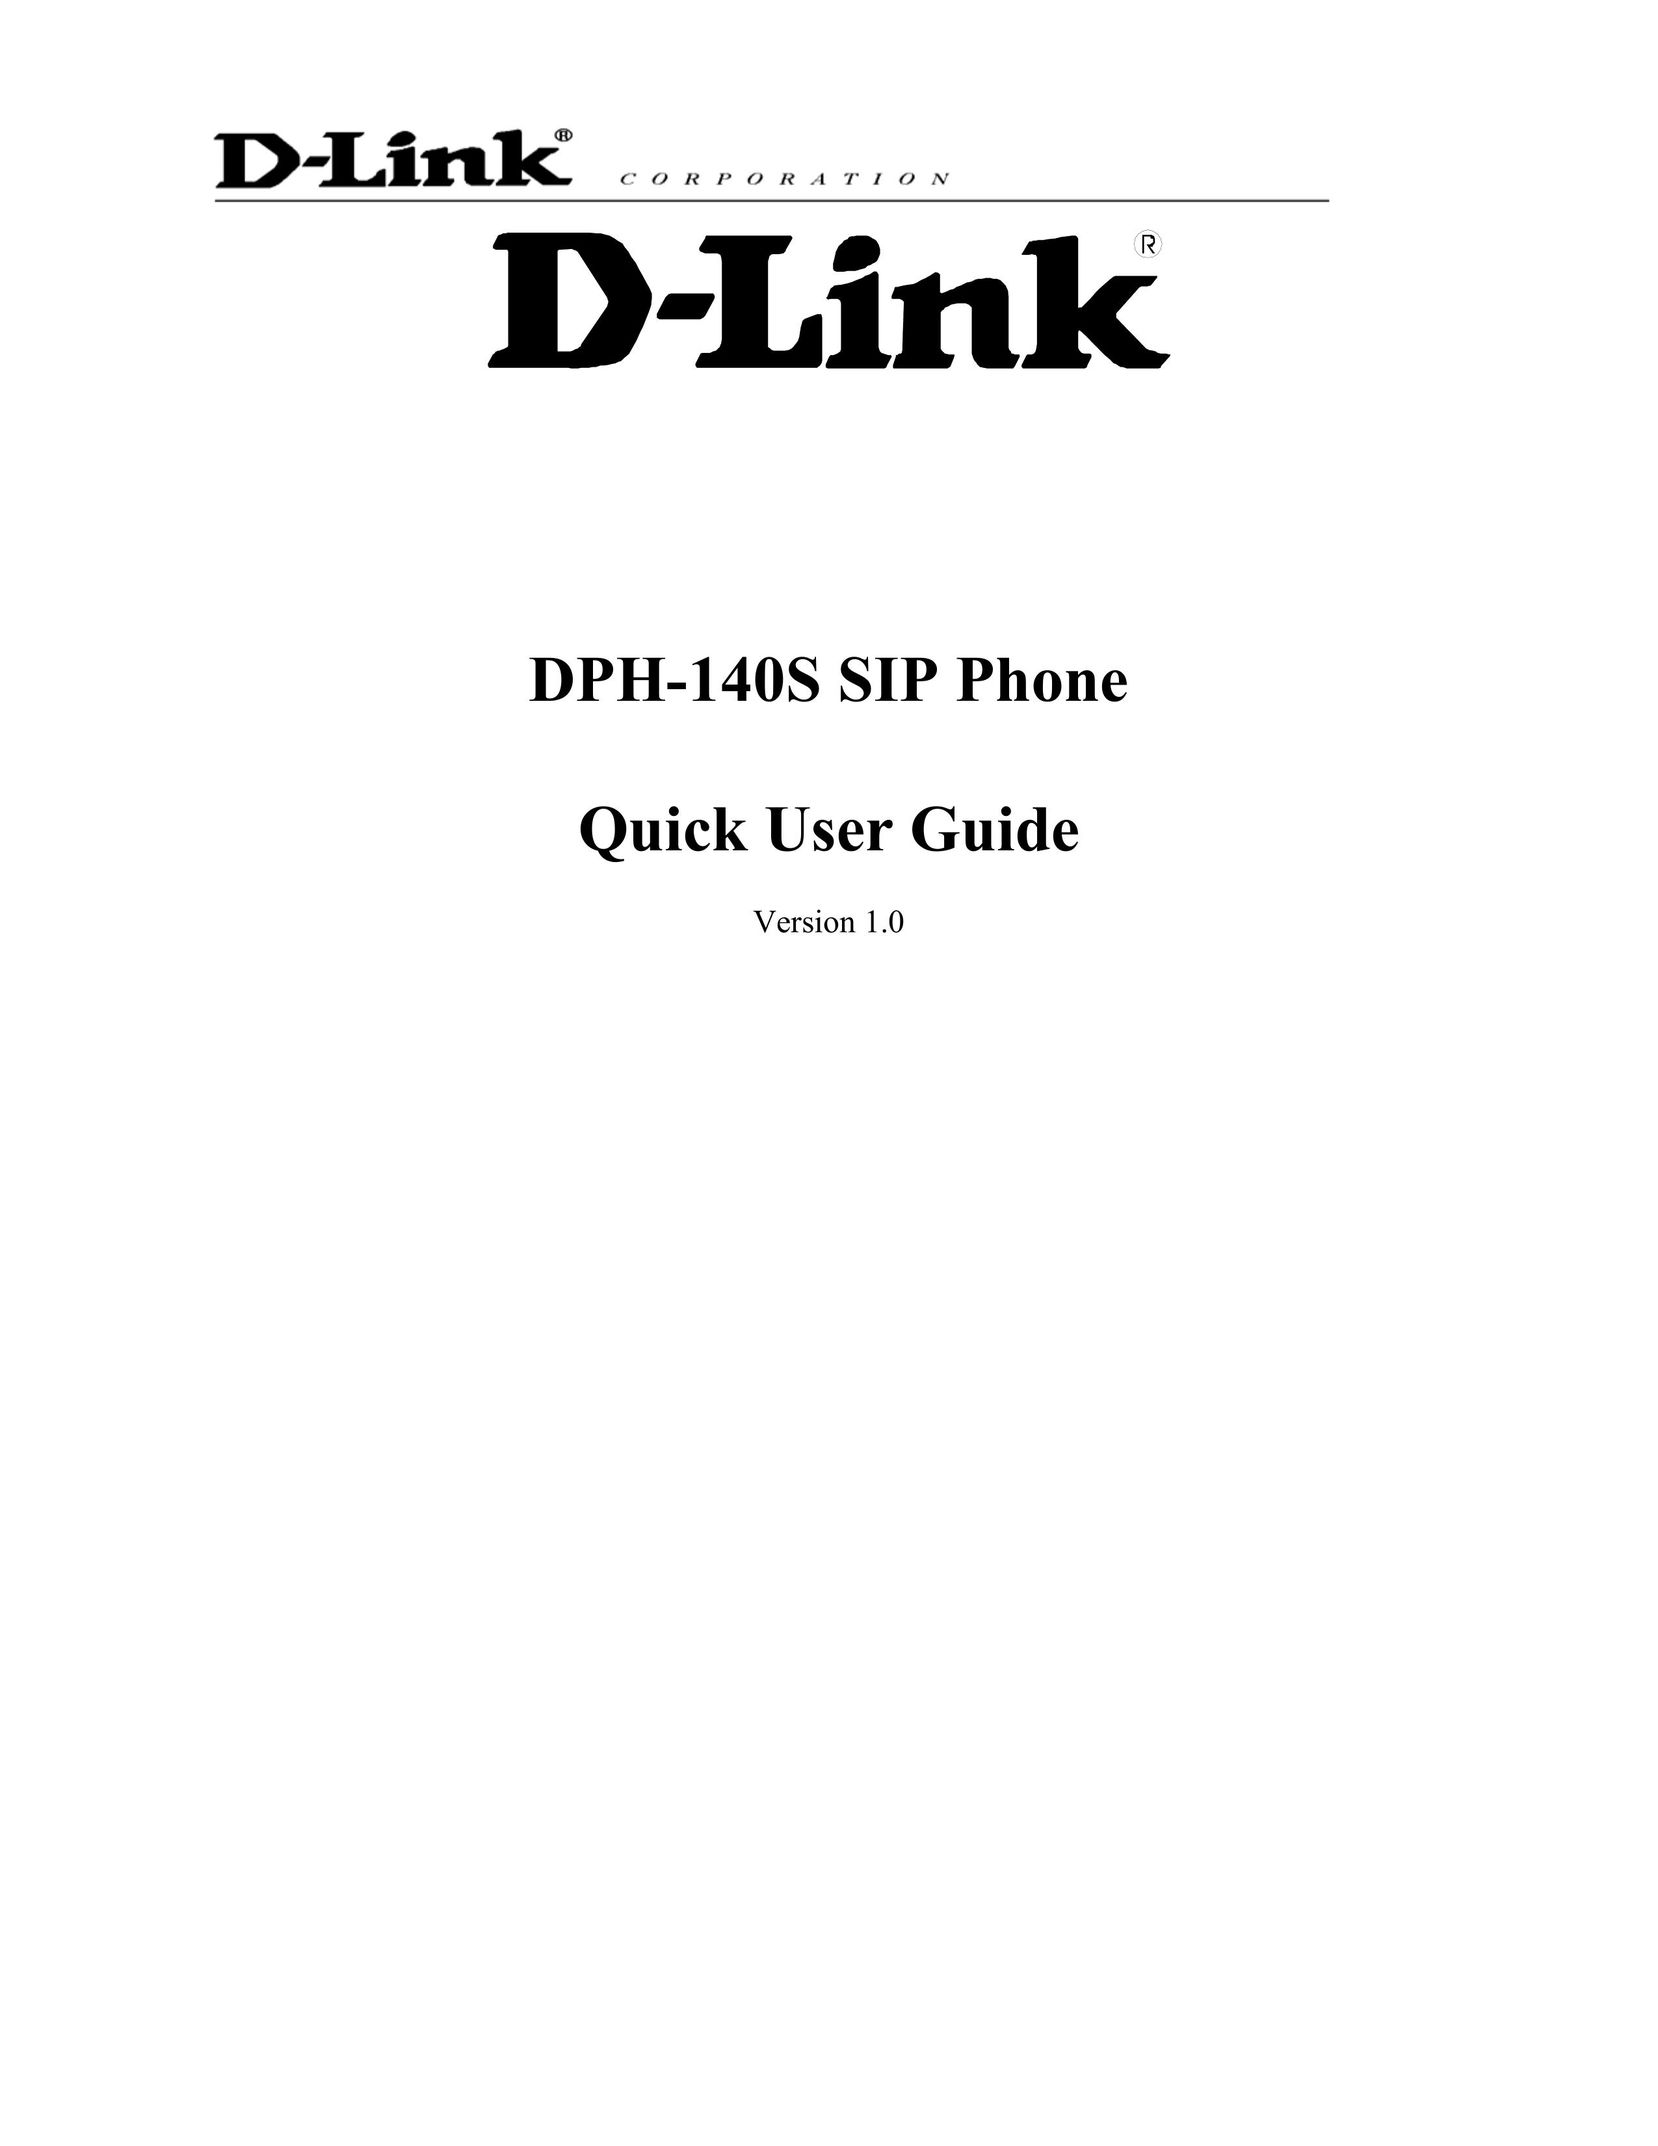 D-Link DPH-140S Amplified Phone User Manual